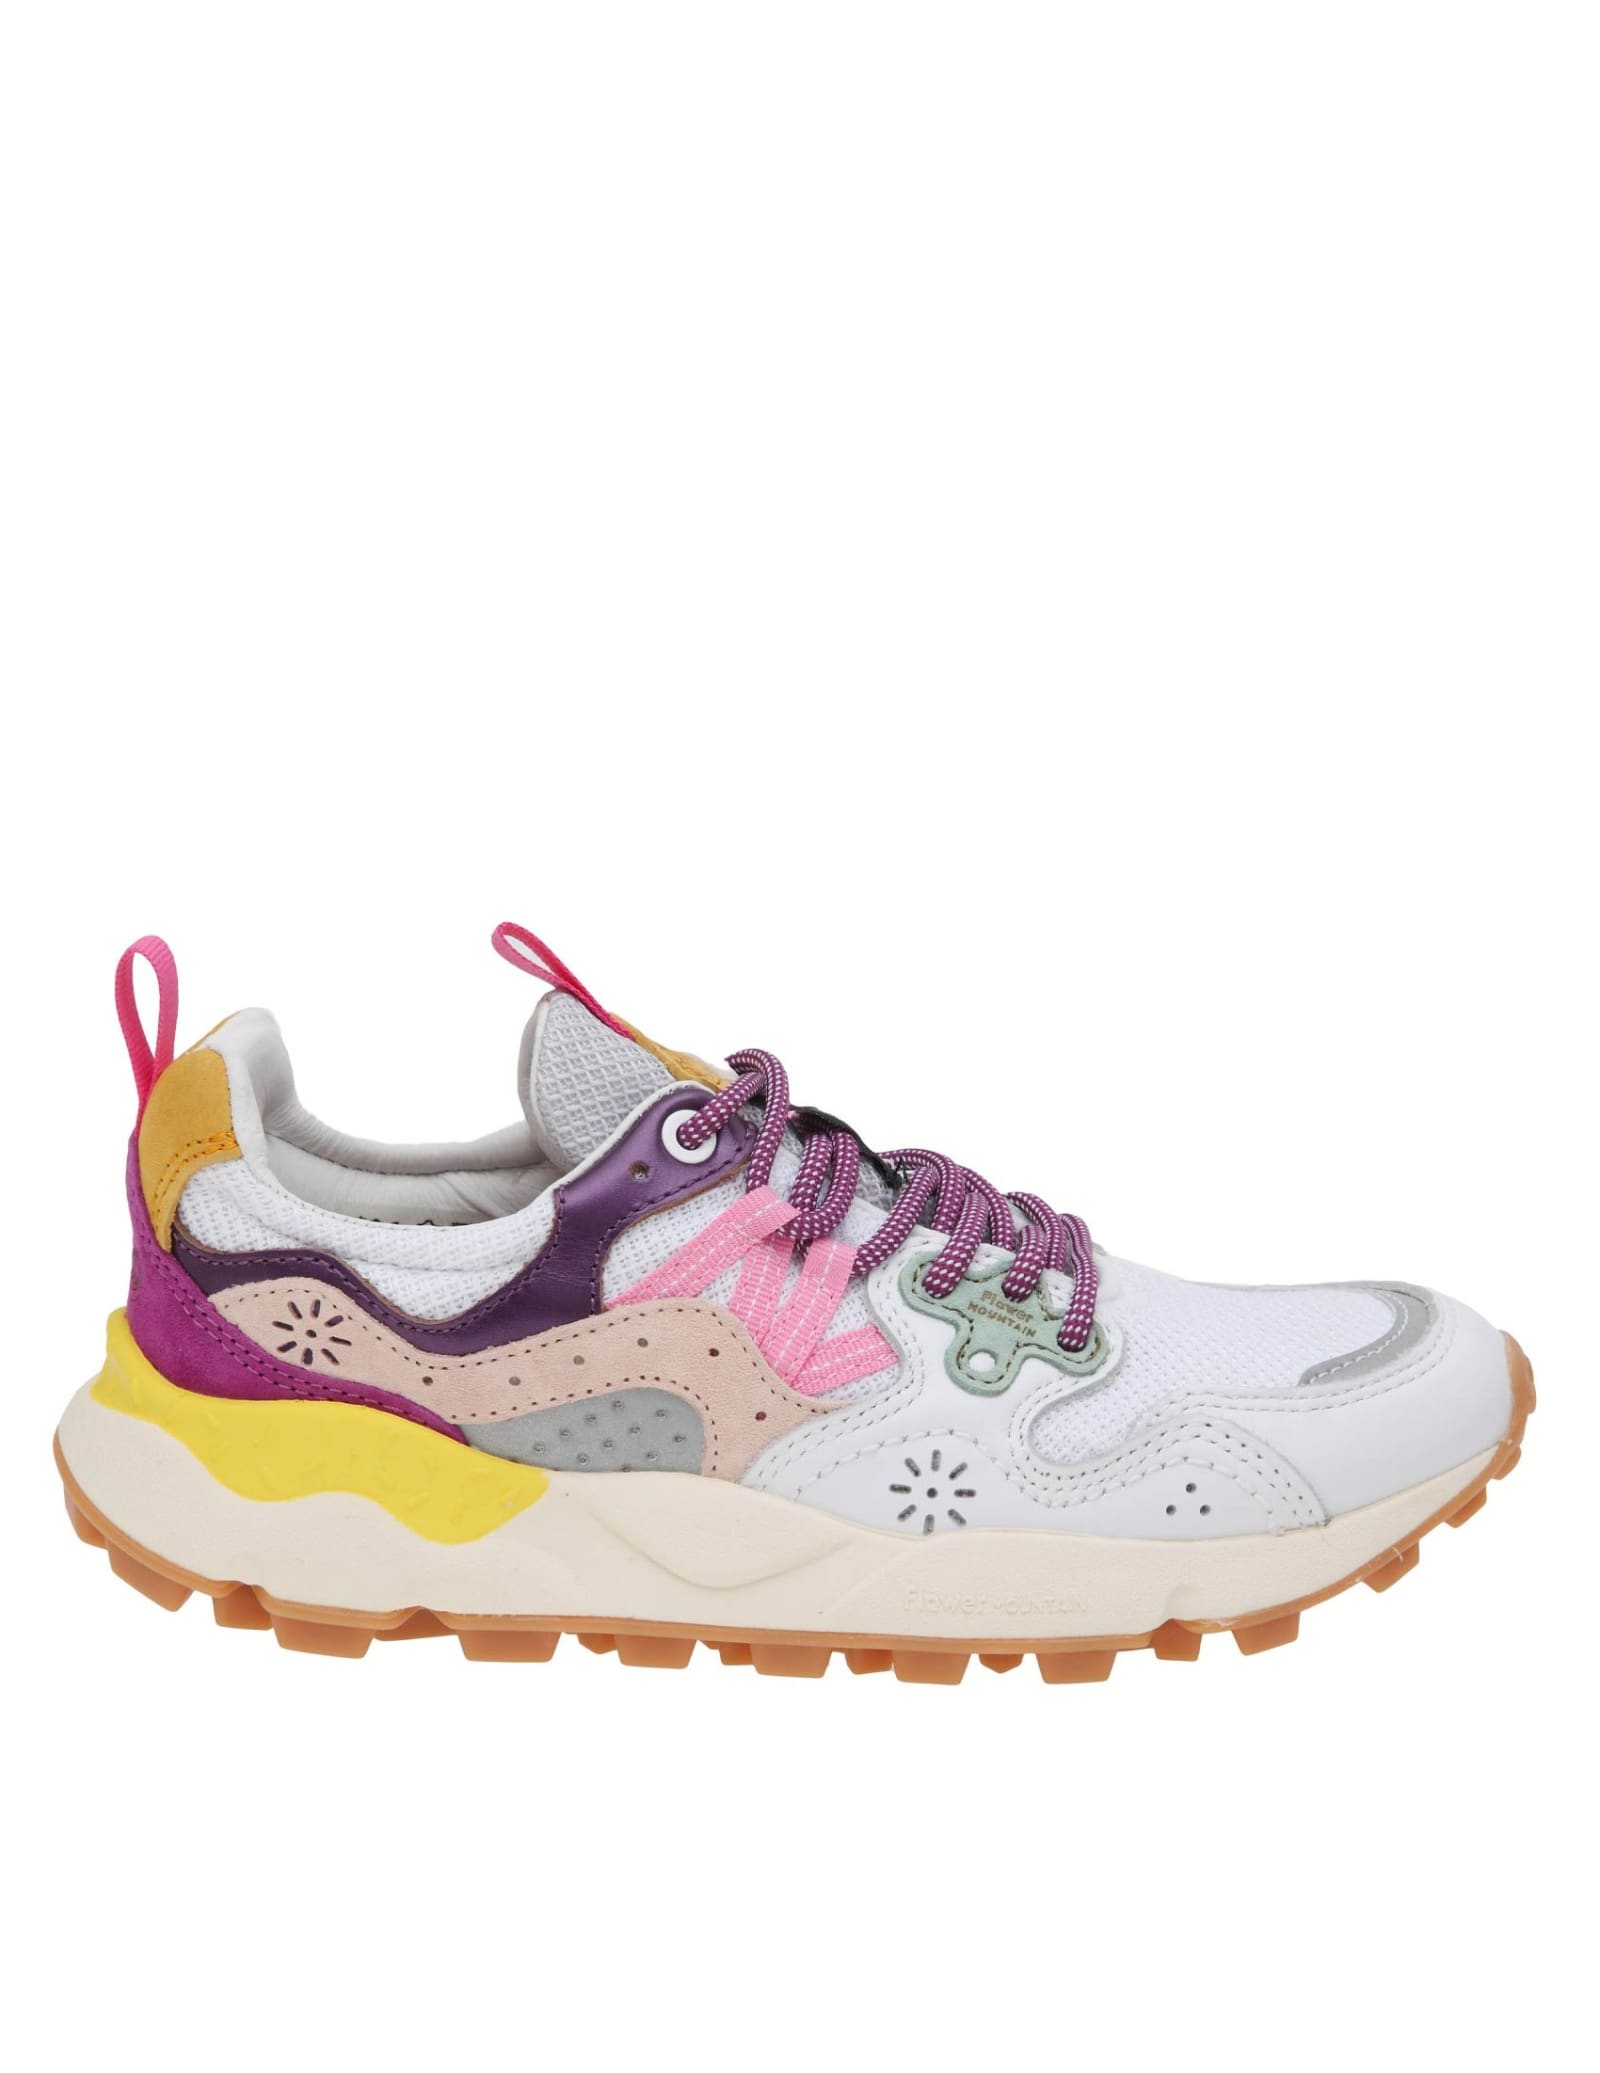 Flower Mountain Sneakers Yamano 3 In Fabric And Leather